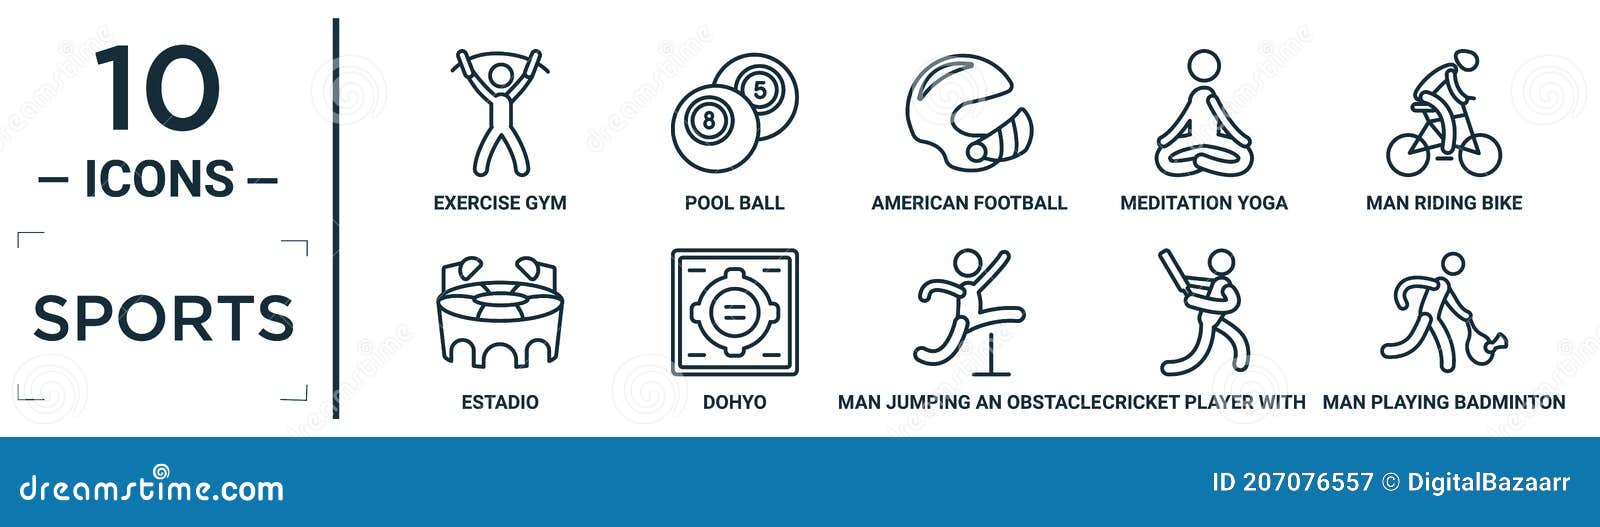 sports linear icon set. includes thin line exercise gym, american football player helmet, man riding bike, dohyo, cricket player